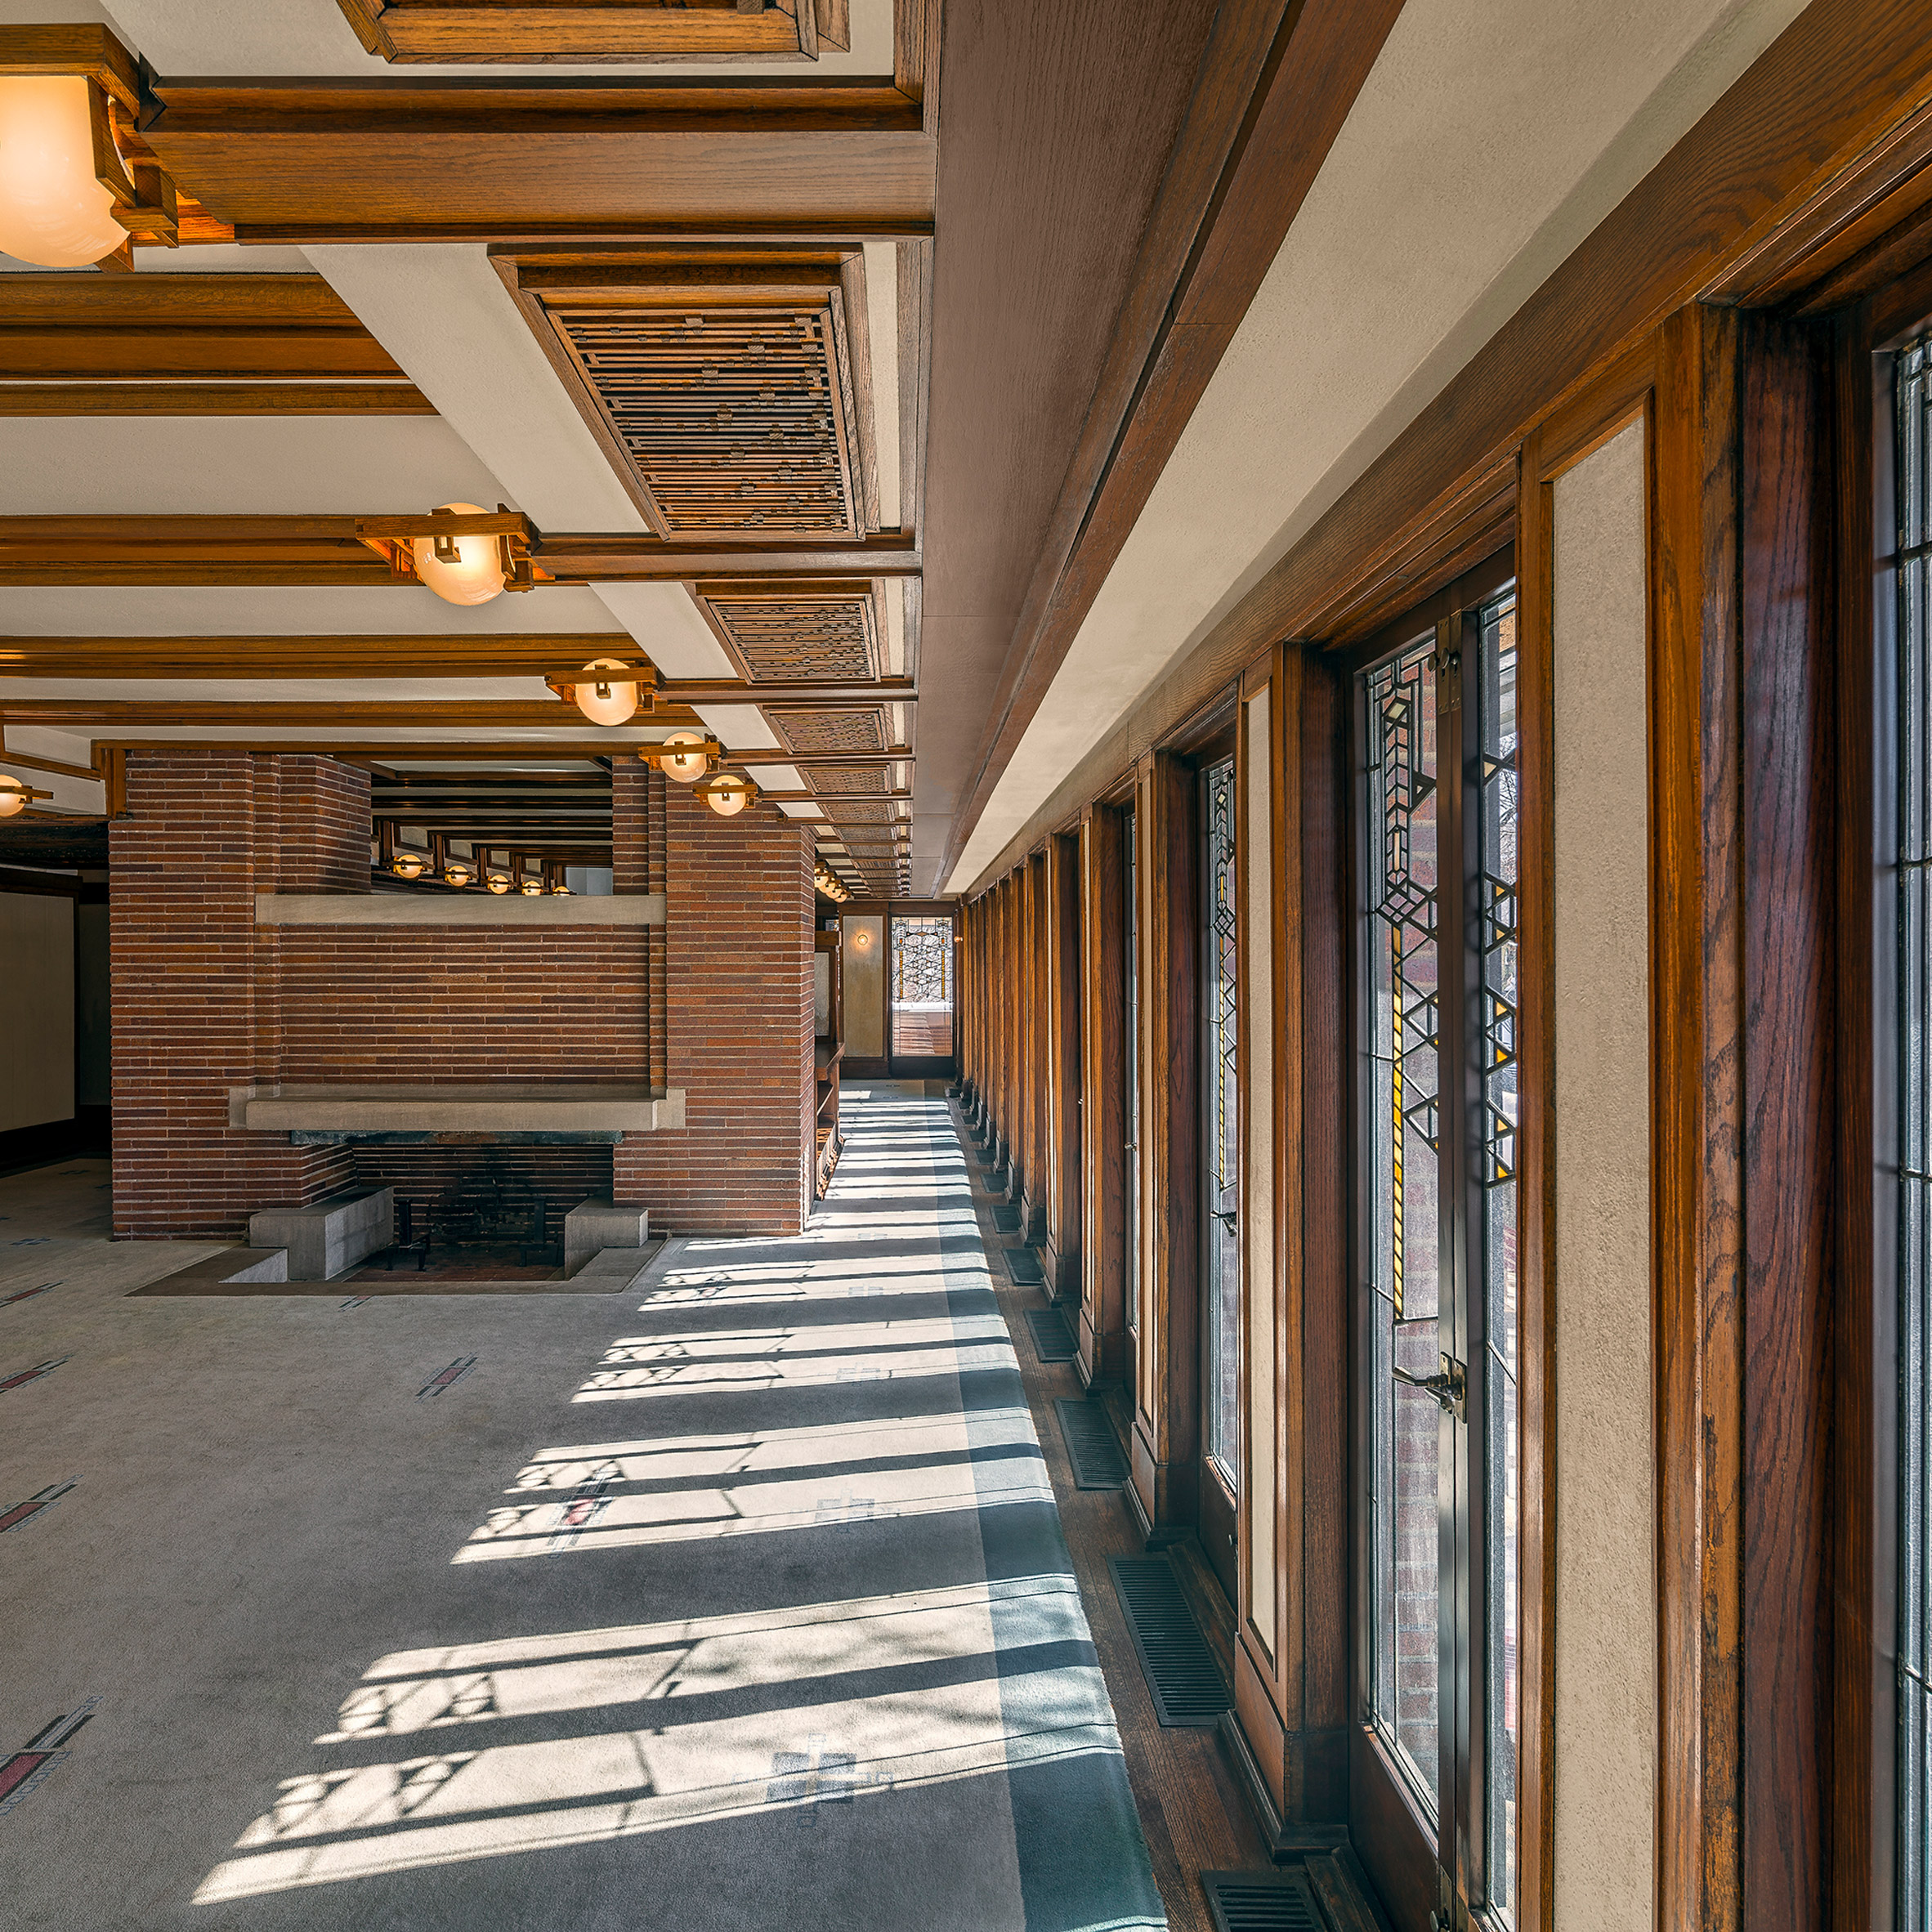 Robie House is one of the eight Frank Lloyd Wright buildings successfully nominated for heritage status